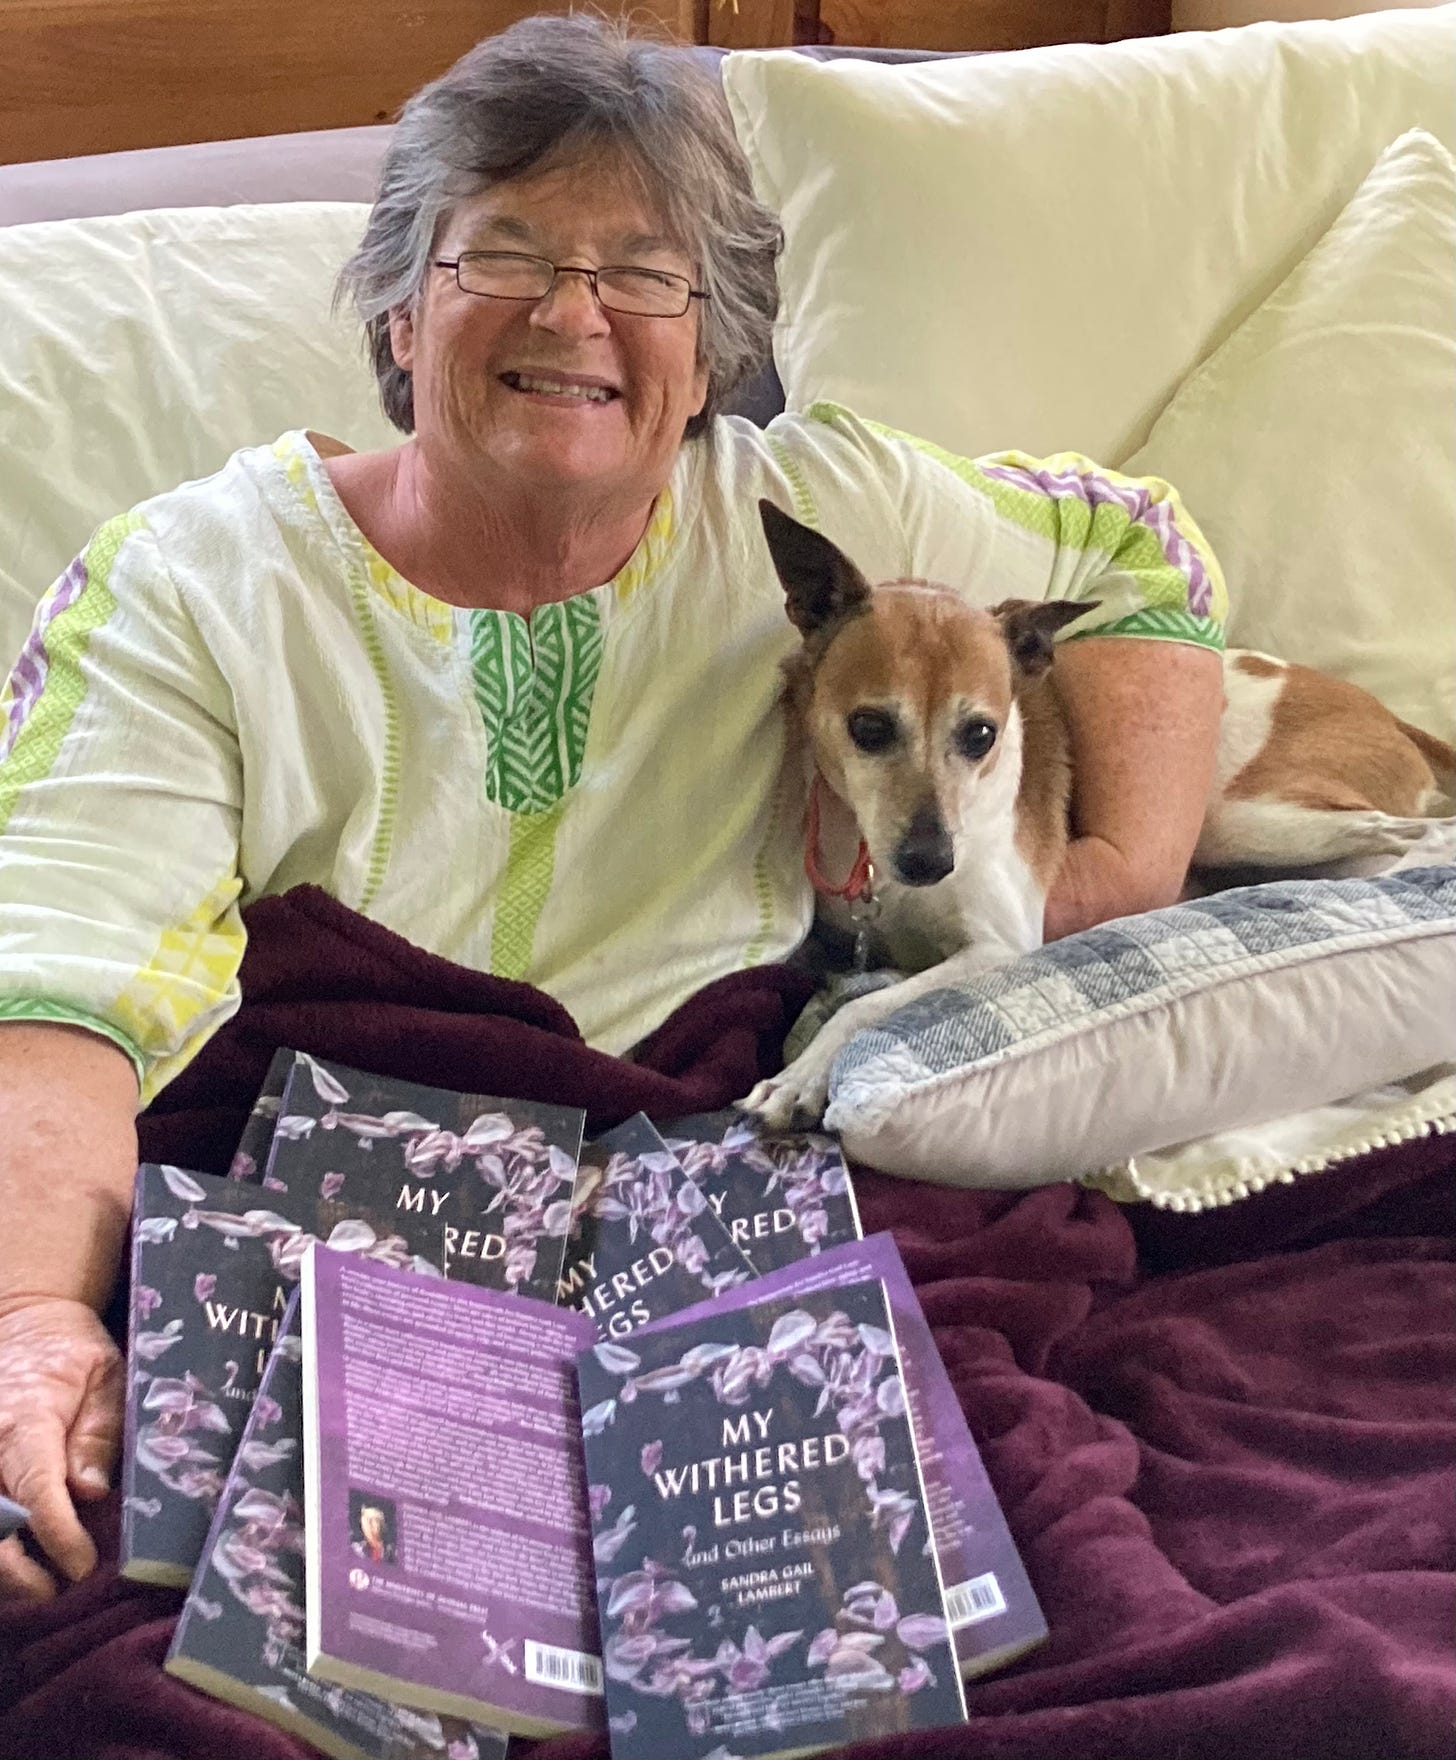 An older white woman in a yellow mu mu sitting propped up in bed with a little brown and white terrier type dog tucked under her arm. Many copies of "My Withered Legs and Other Essays" are spread over her lap. 